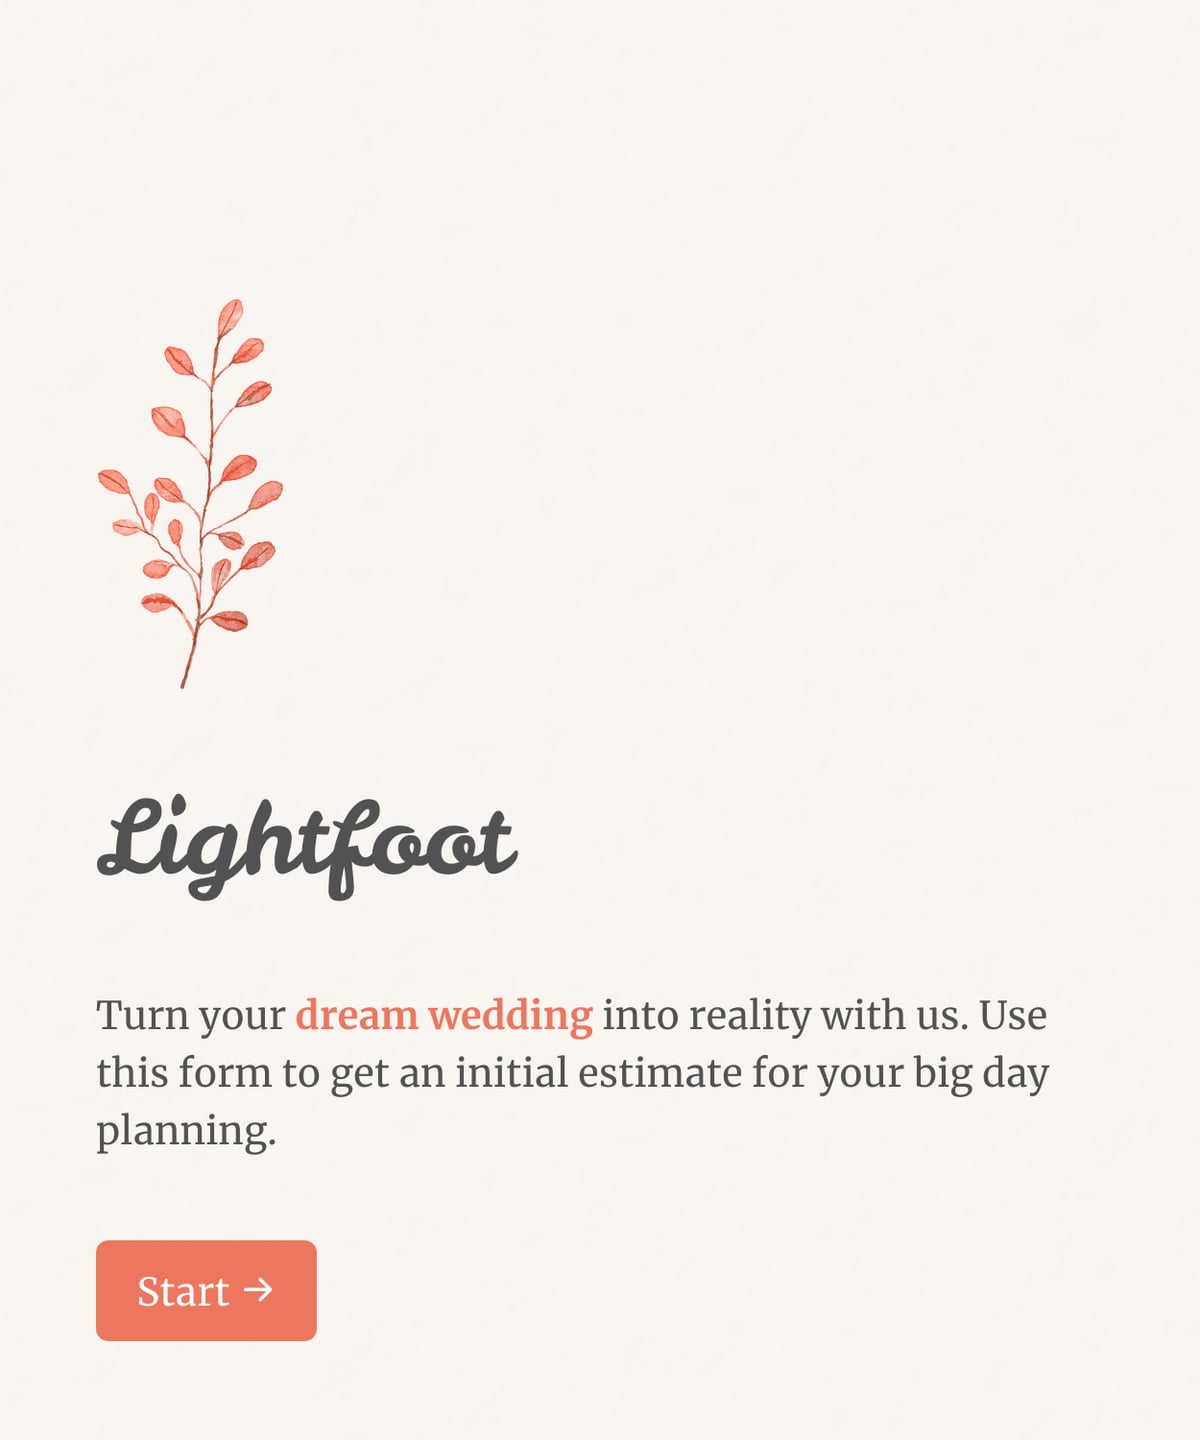 Welcome step of 'Wedding planning cost estimation form' with an image, introduction text, and a 'Start' button